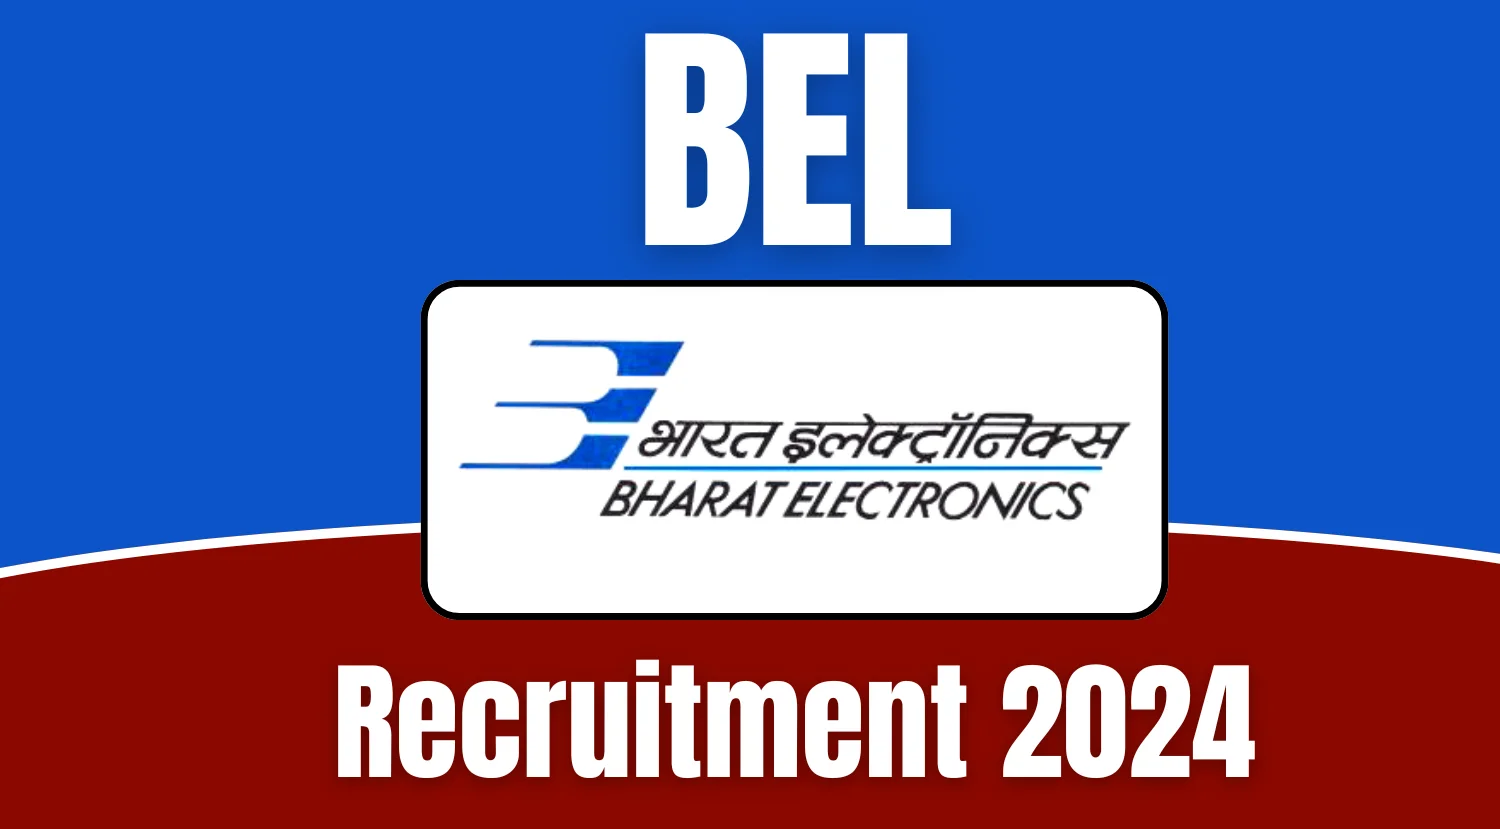 BEL Recruitment 2024 Notification, Apply Now to work in Civil Aviation Domain